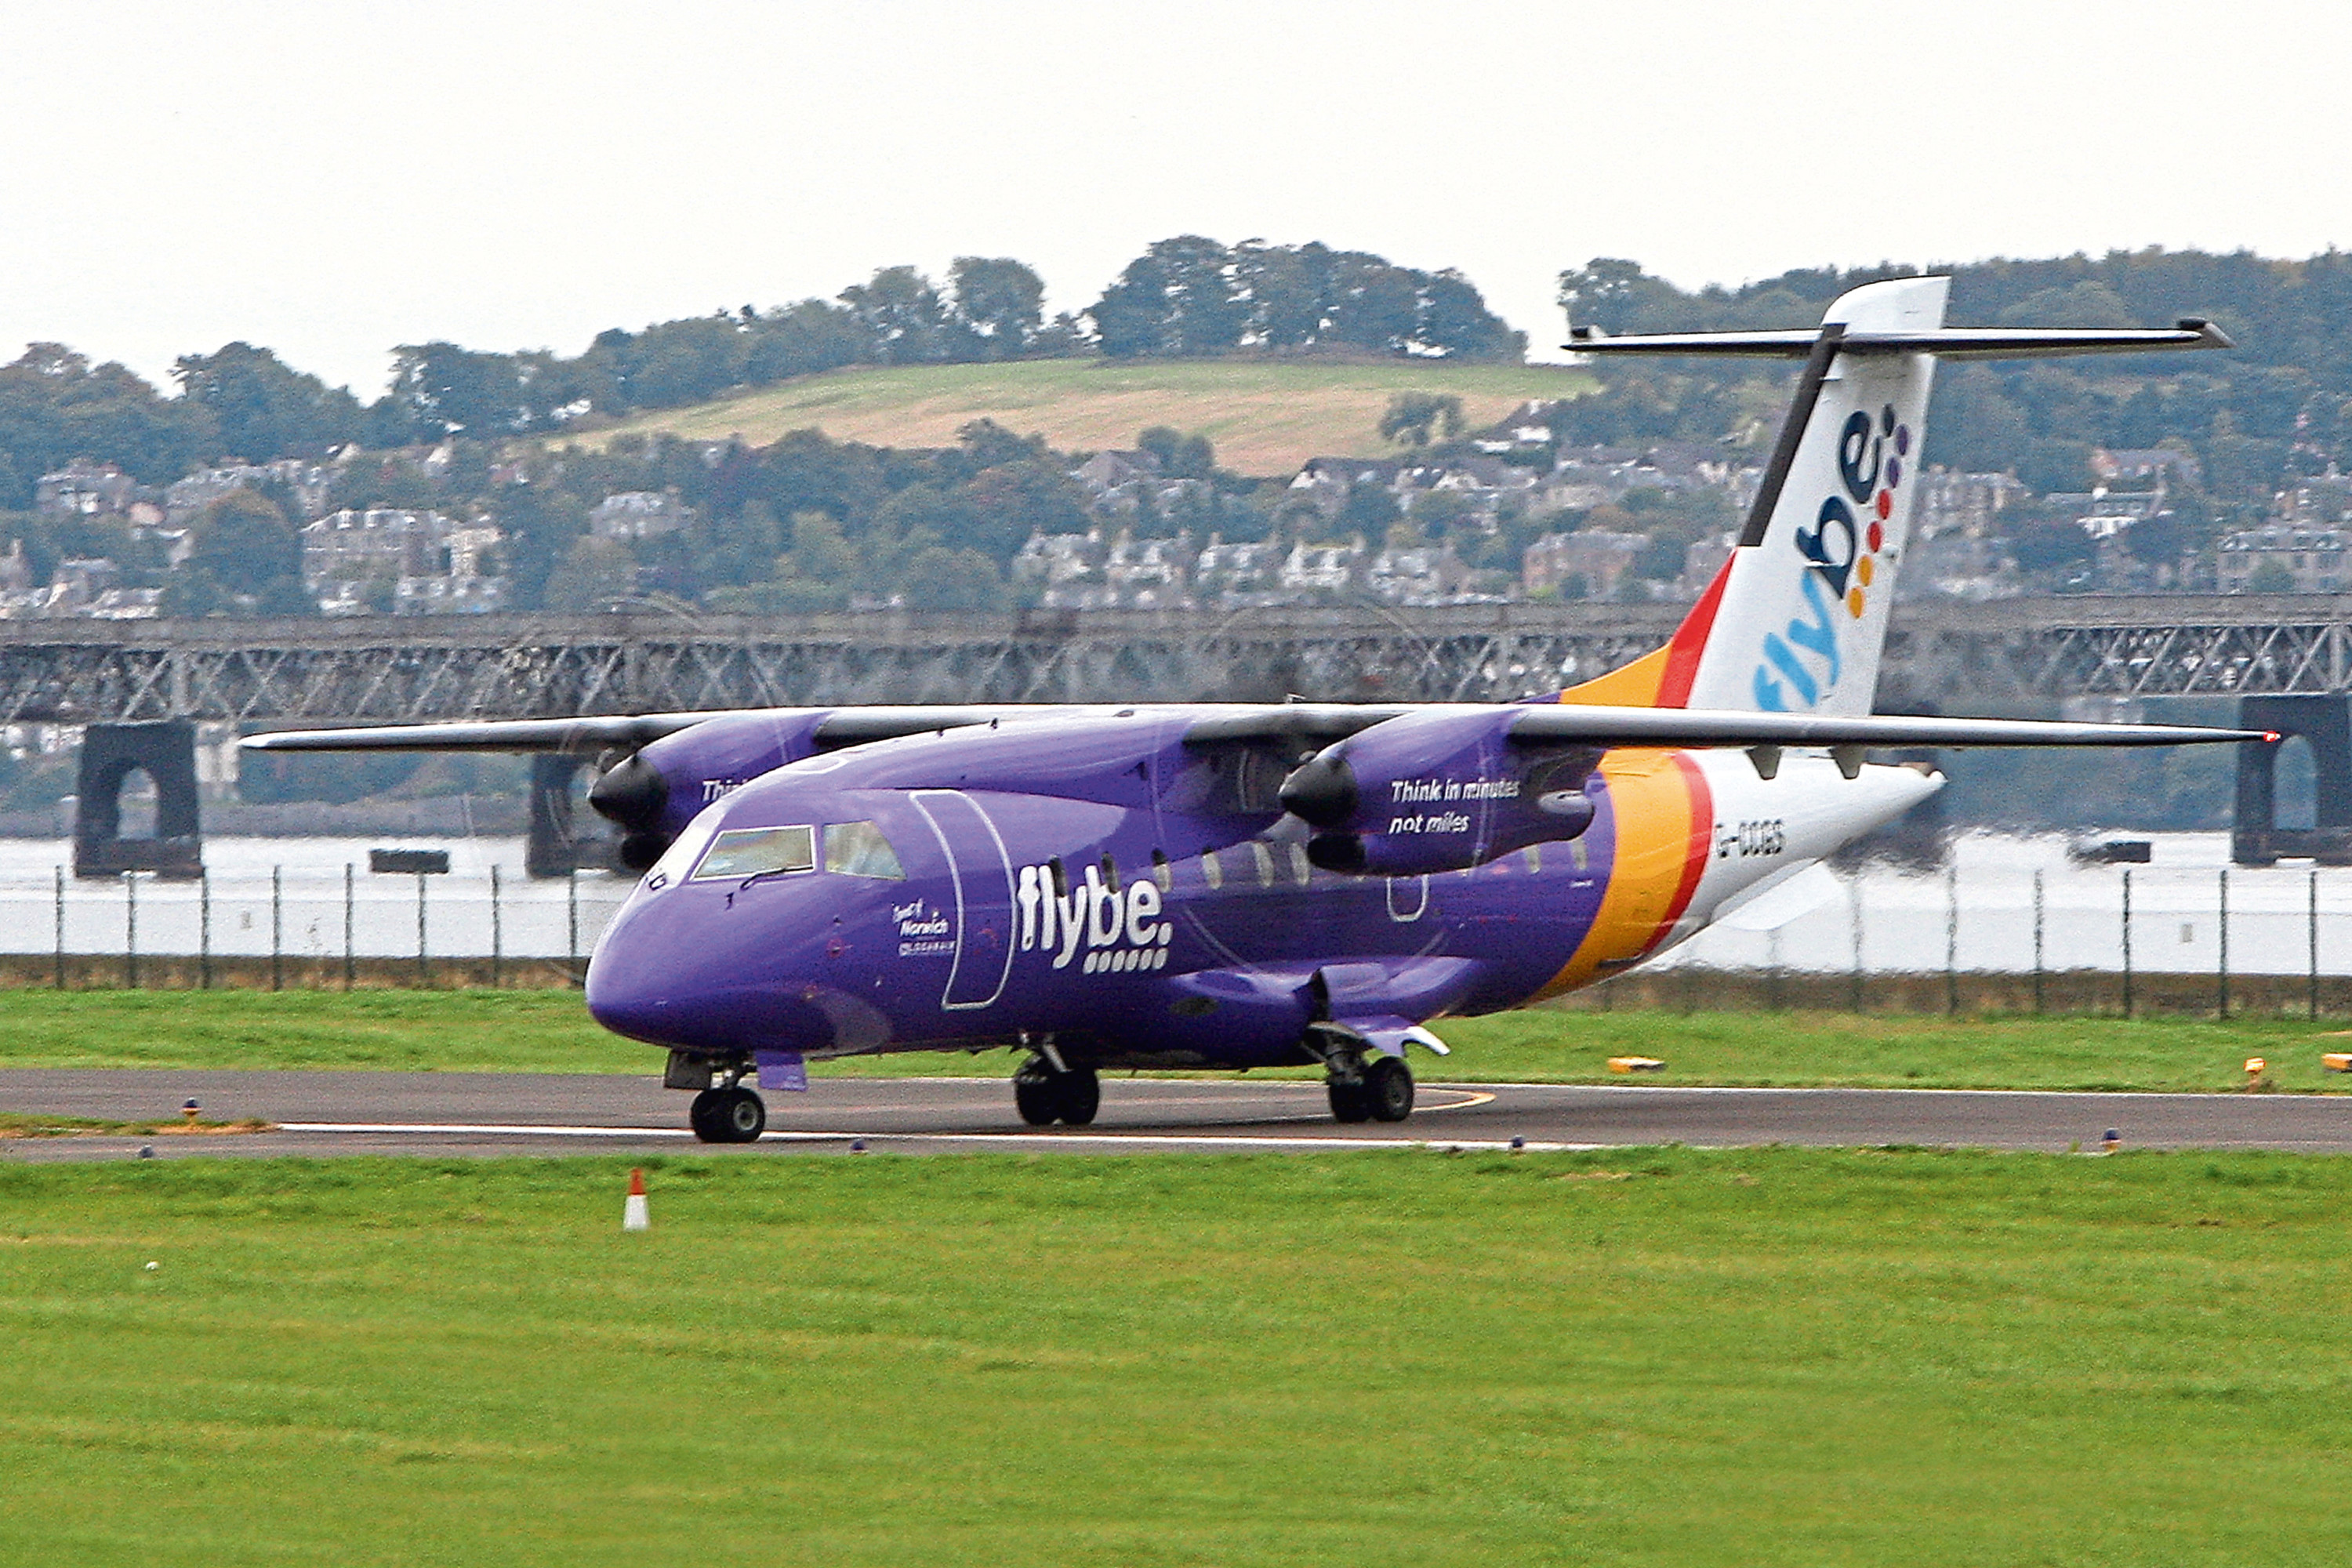 Flybe has cancelled flights from Aberdeen due to staff shortages